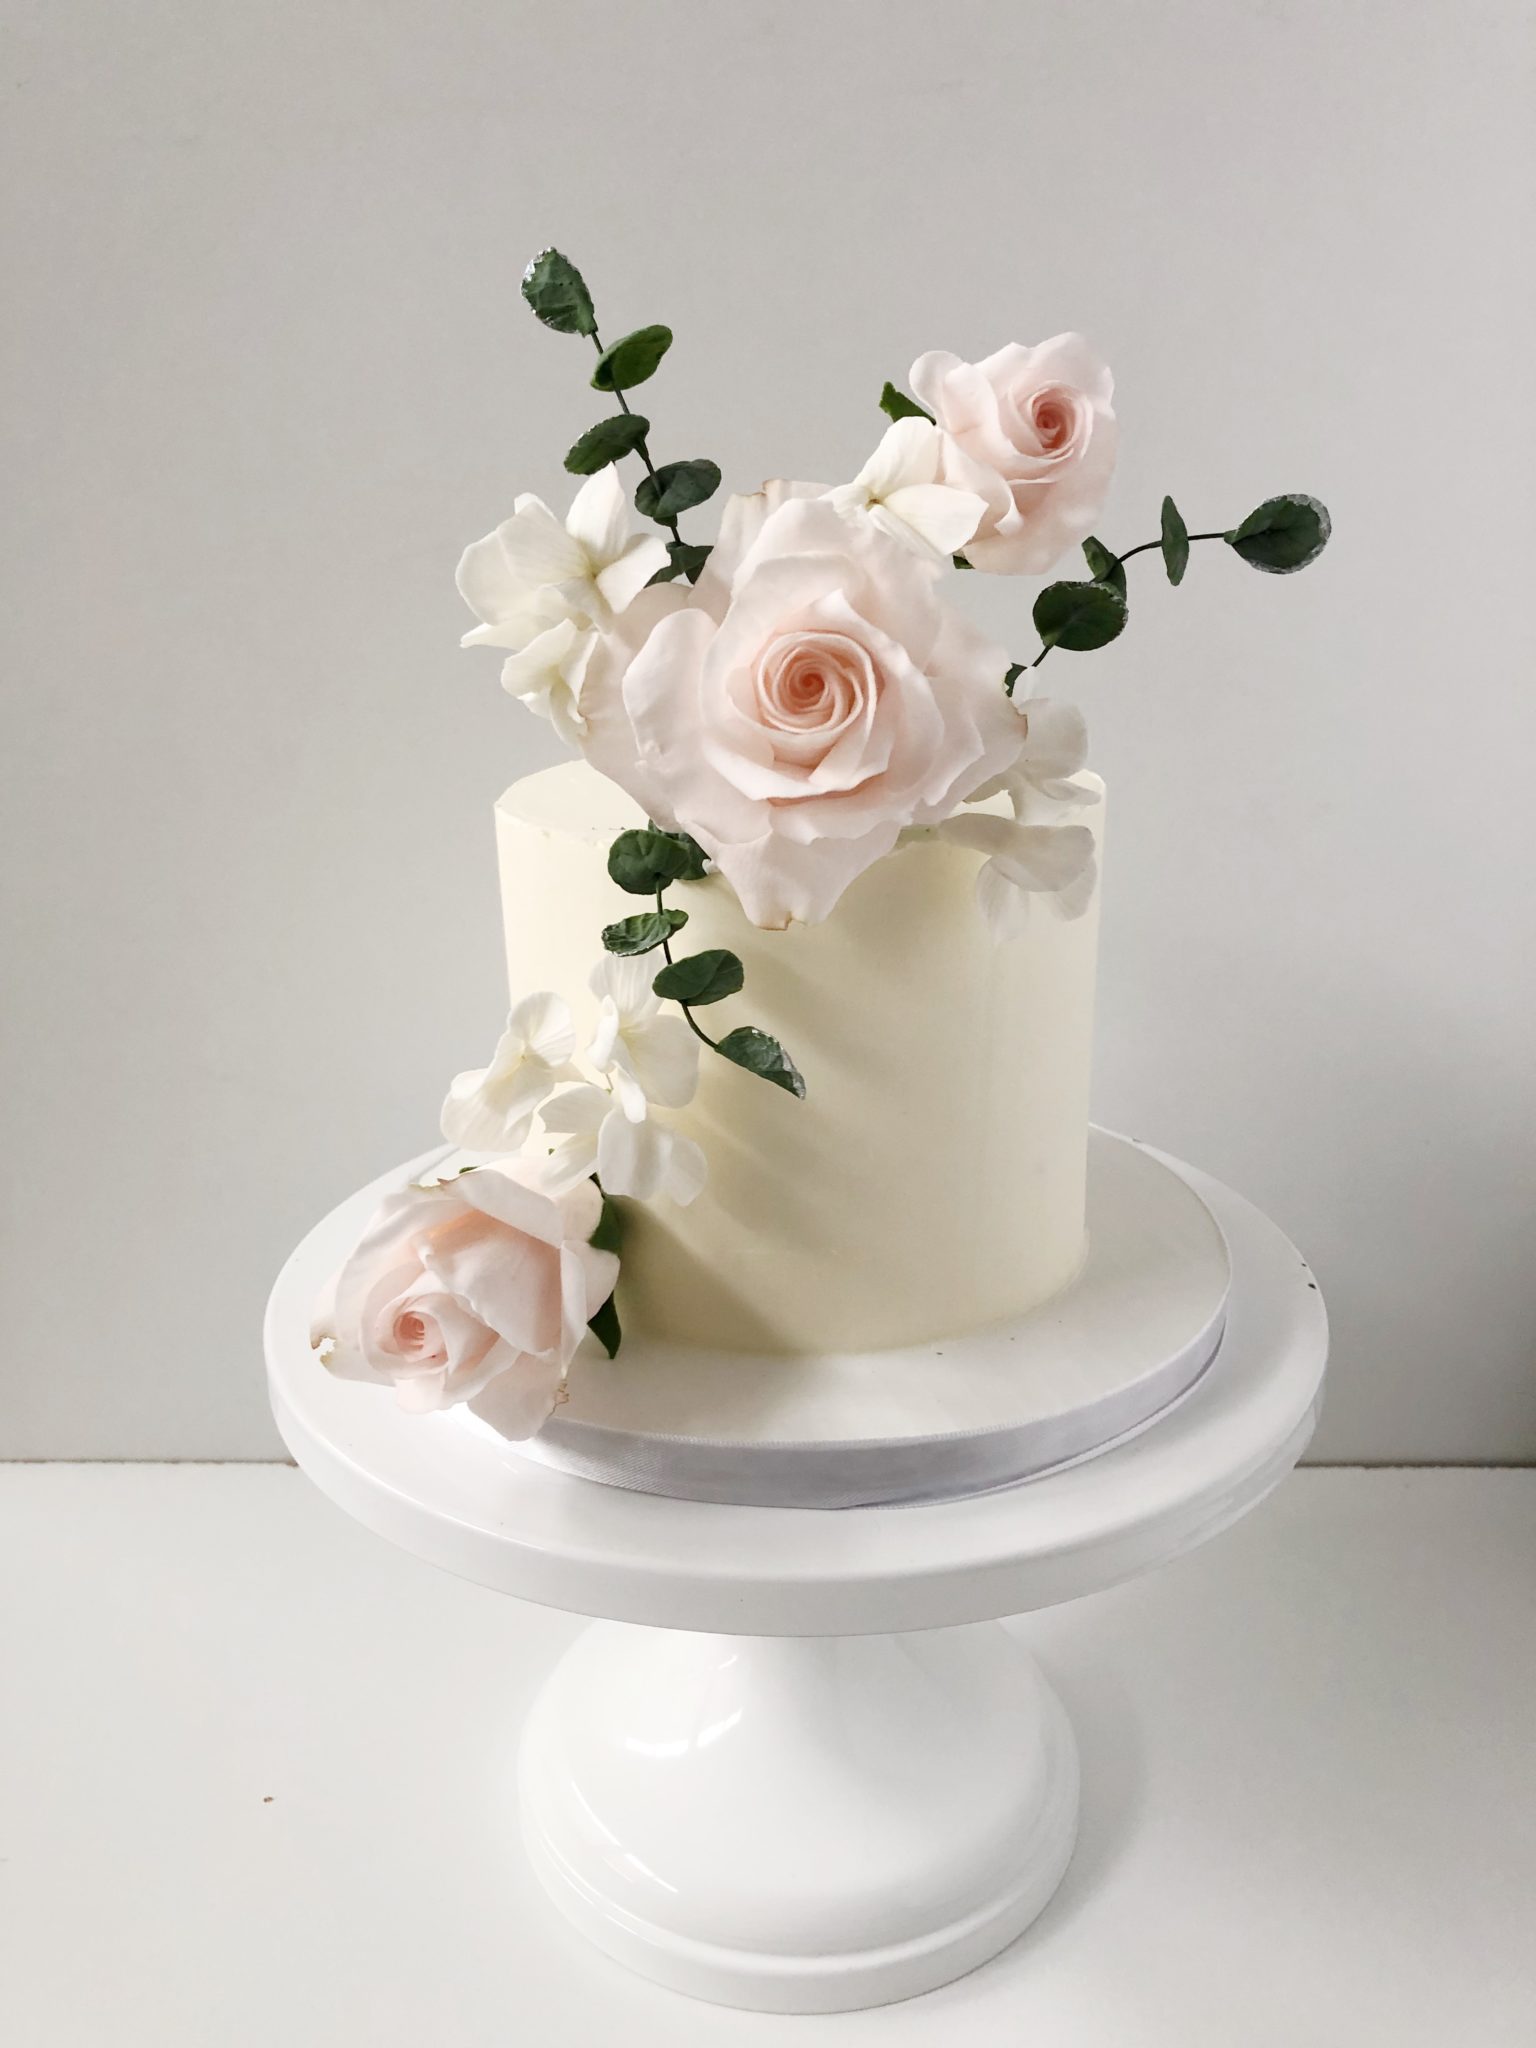 Cute one-tier cake with blush sugar flowers